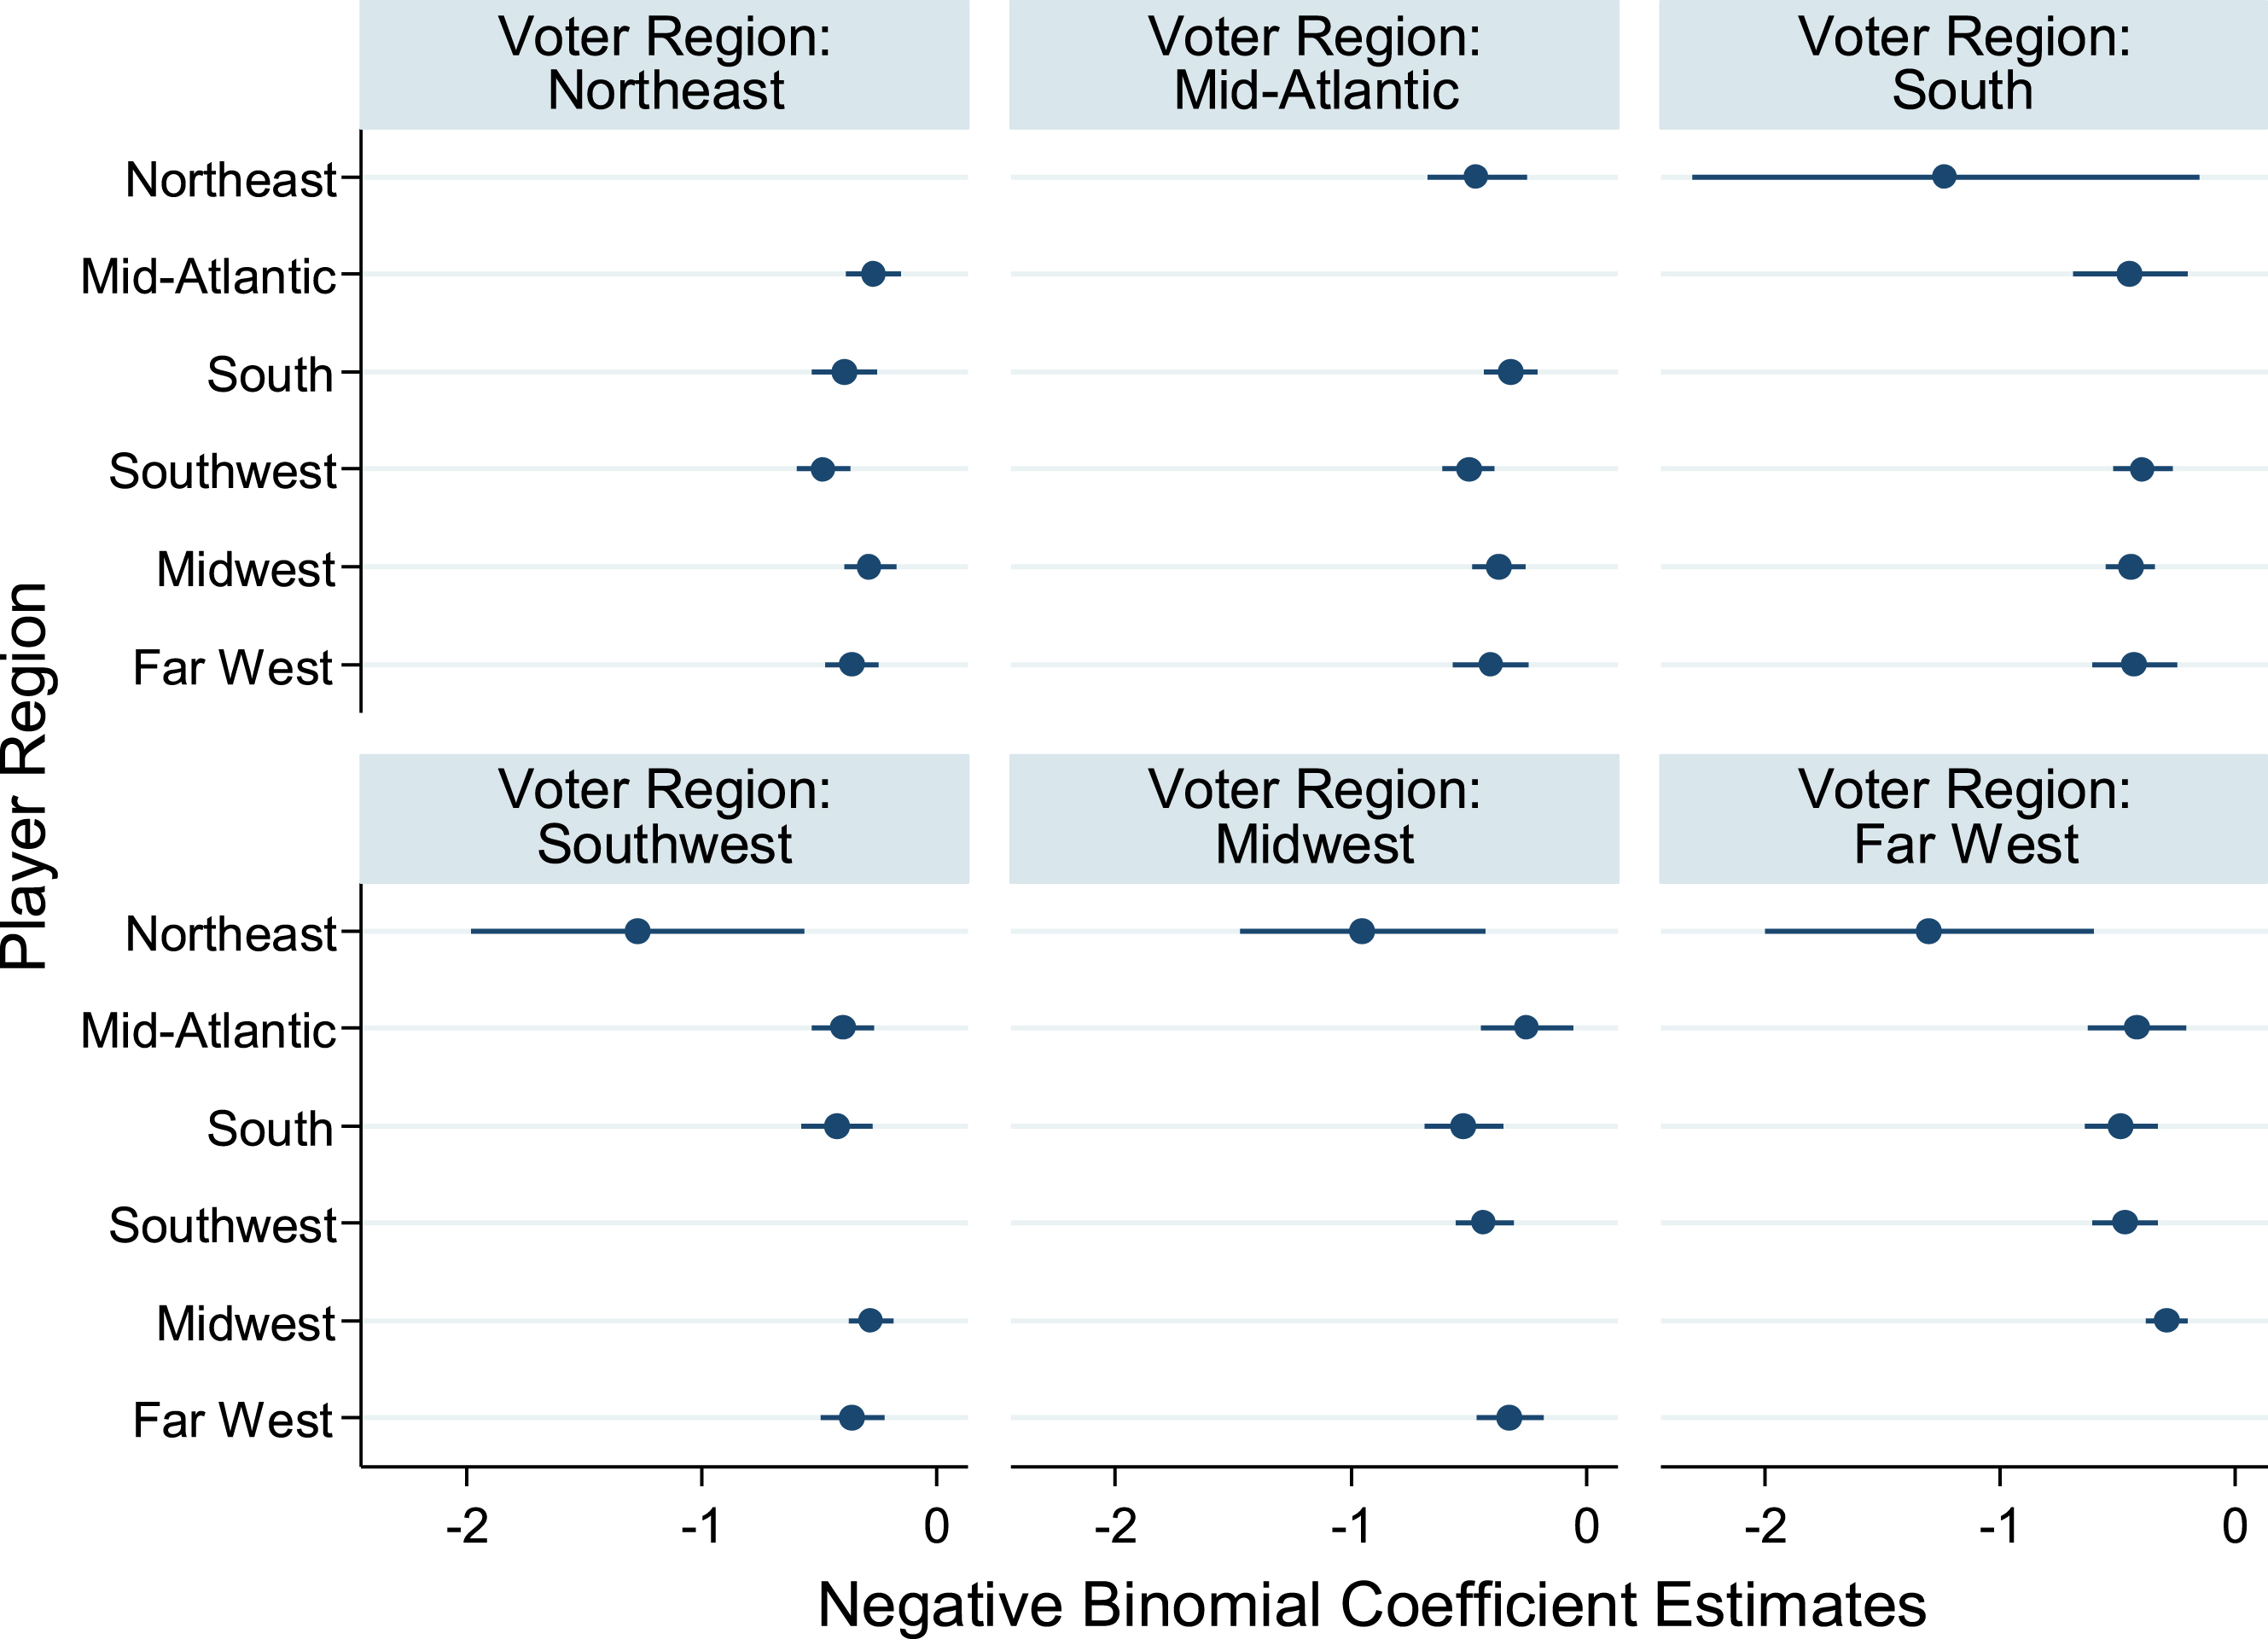 Cross-region negative binomial regression estimates. Notes: Data from all years 1990–2016 were used to estimate the model, which is a sensitivity analysis of Equation 1a estimated replacing ‘player in region’ and voter-region indicator variables with a set of indicator variables specific to each combination of player-region and voter-region; indicator variables where player-region and voter-region are the same are excluded. Each dot represents the negative binomial coefficient and each bar represents the 95% confidence interval around the coefficient estimate. Each coefficient represents the difference between vote tallies for players in the region corresponding to the coefficient and players sharing the same region as the voters. Statistically significant differences (P < 0.05) exist in each of the following regions between players from regions in parenthesis: Northeast (Mid-Atlantic, Southwest), (Midwest, Southwest); Mid-Atlantic (South, Southwest); Southwest (Midwest, South), (Northeast, all other regions); Midwest (Mid-Atlantic, Northeast), (Far West, Northeast), (Far West, South); Far West (Midwest, South), (Midwest, Southwest), (Northeast, all other regions). Because each coefficient is tested against the other four coefficients in the voter region, another set of tests were conducted using the Bonferroni correction with four comparisons at the 5% significance level. All aforementioned differences remain statistically significant (P < 0.05) except in the Far West region between players from the Northeast and South and players from the Northeast and Southwest.